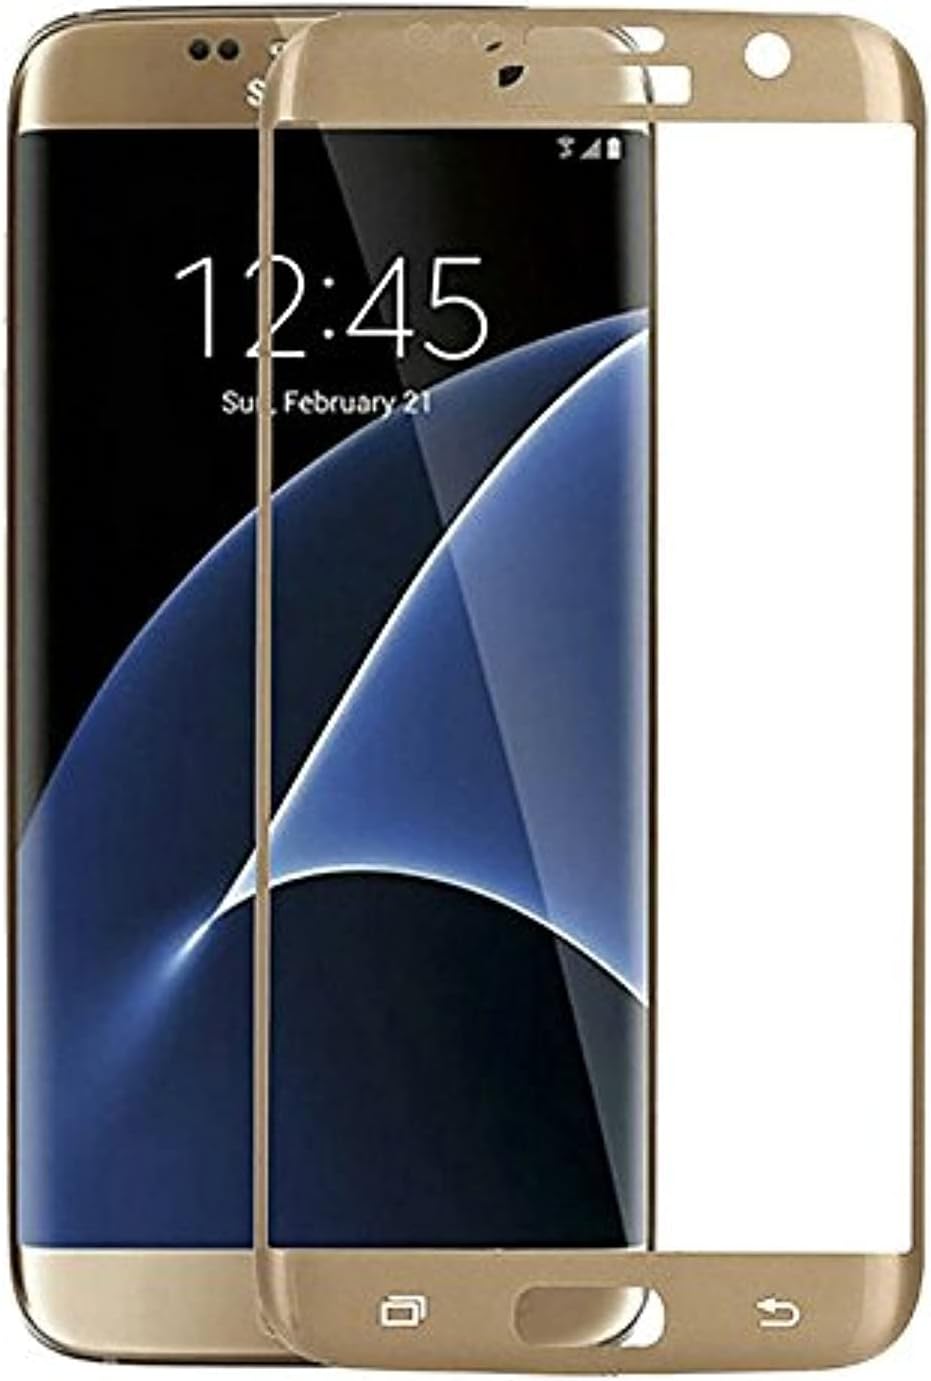 Ineix 3D Tempered Glass Screen Protector for Samsung Galaxy S7 Edge - Transparent with Gold Frame